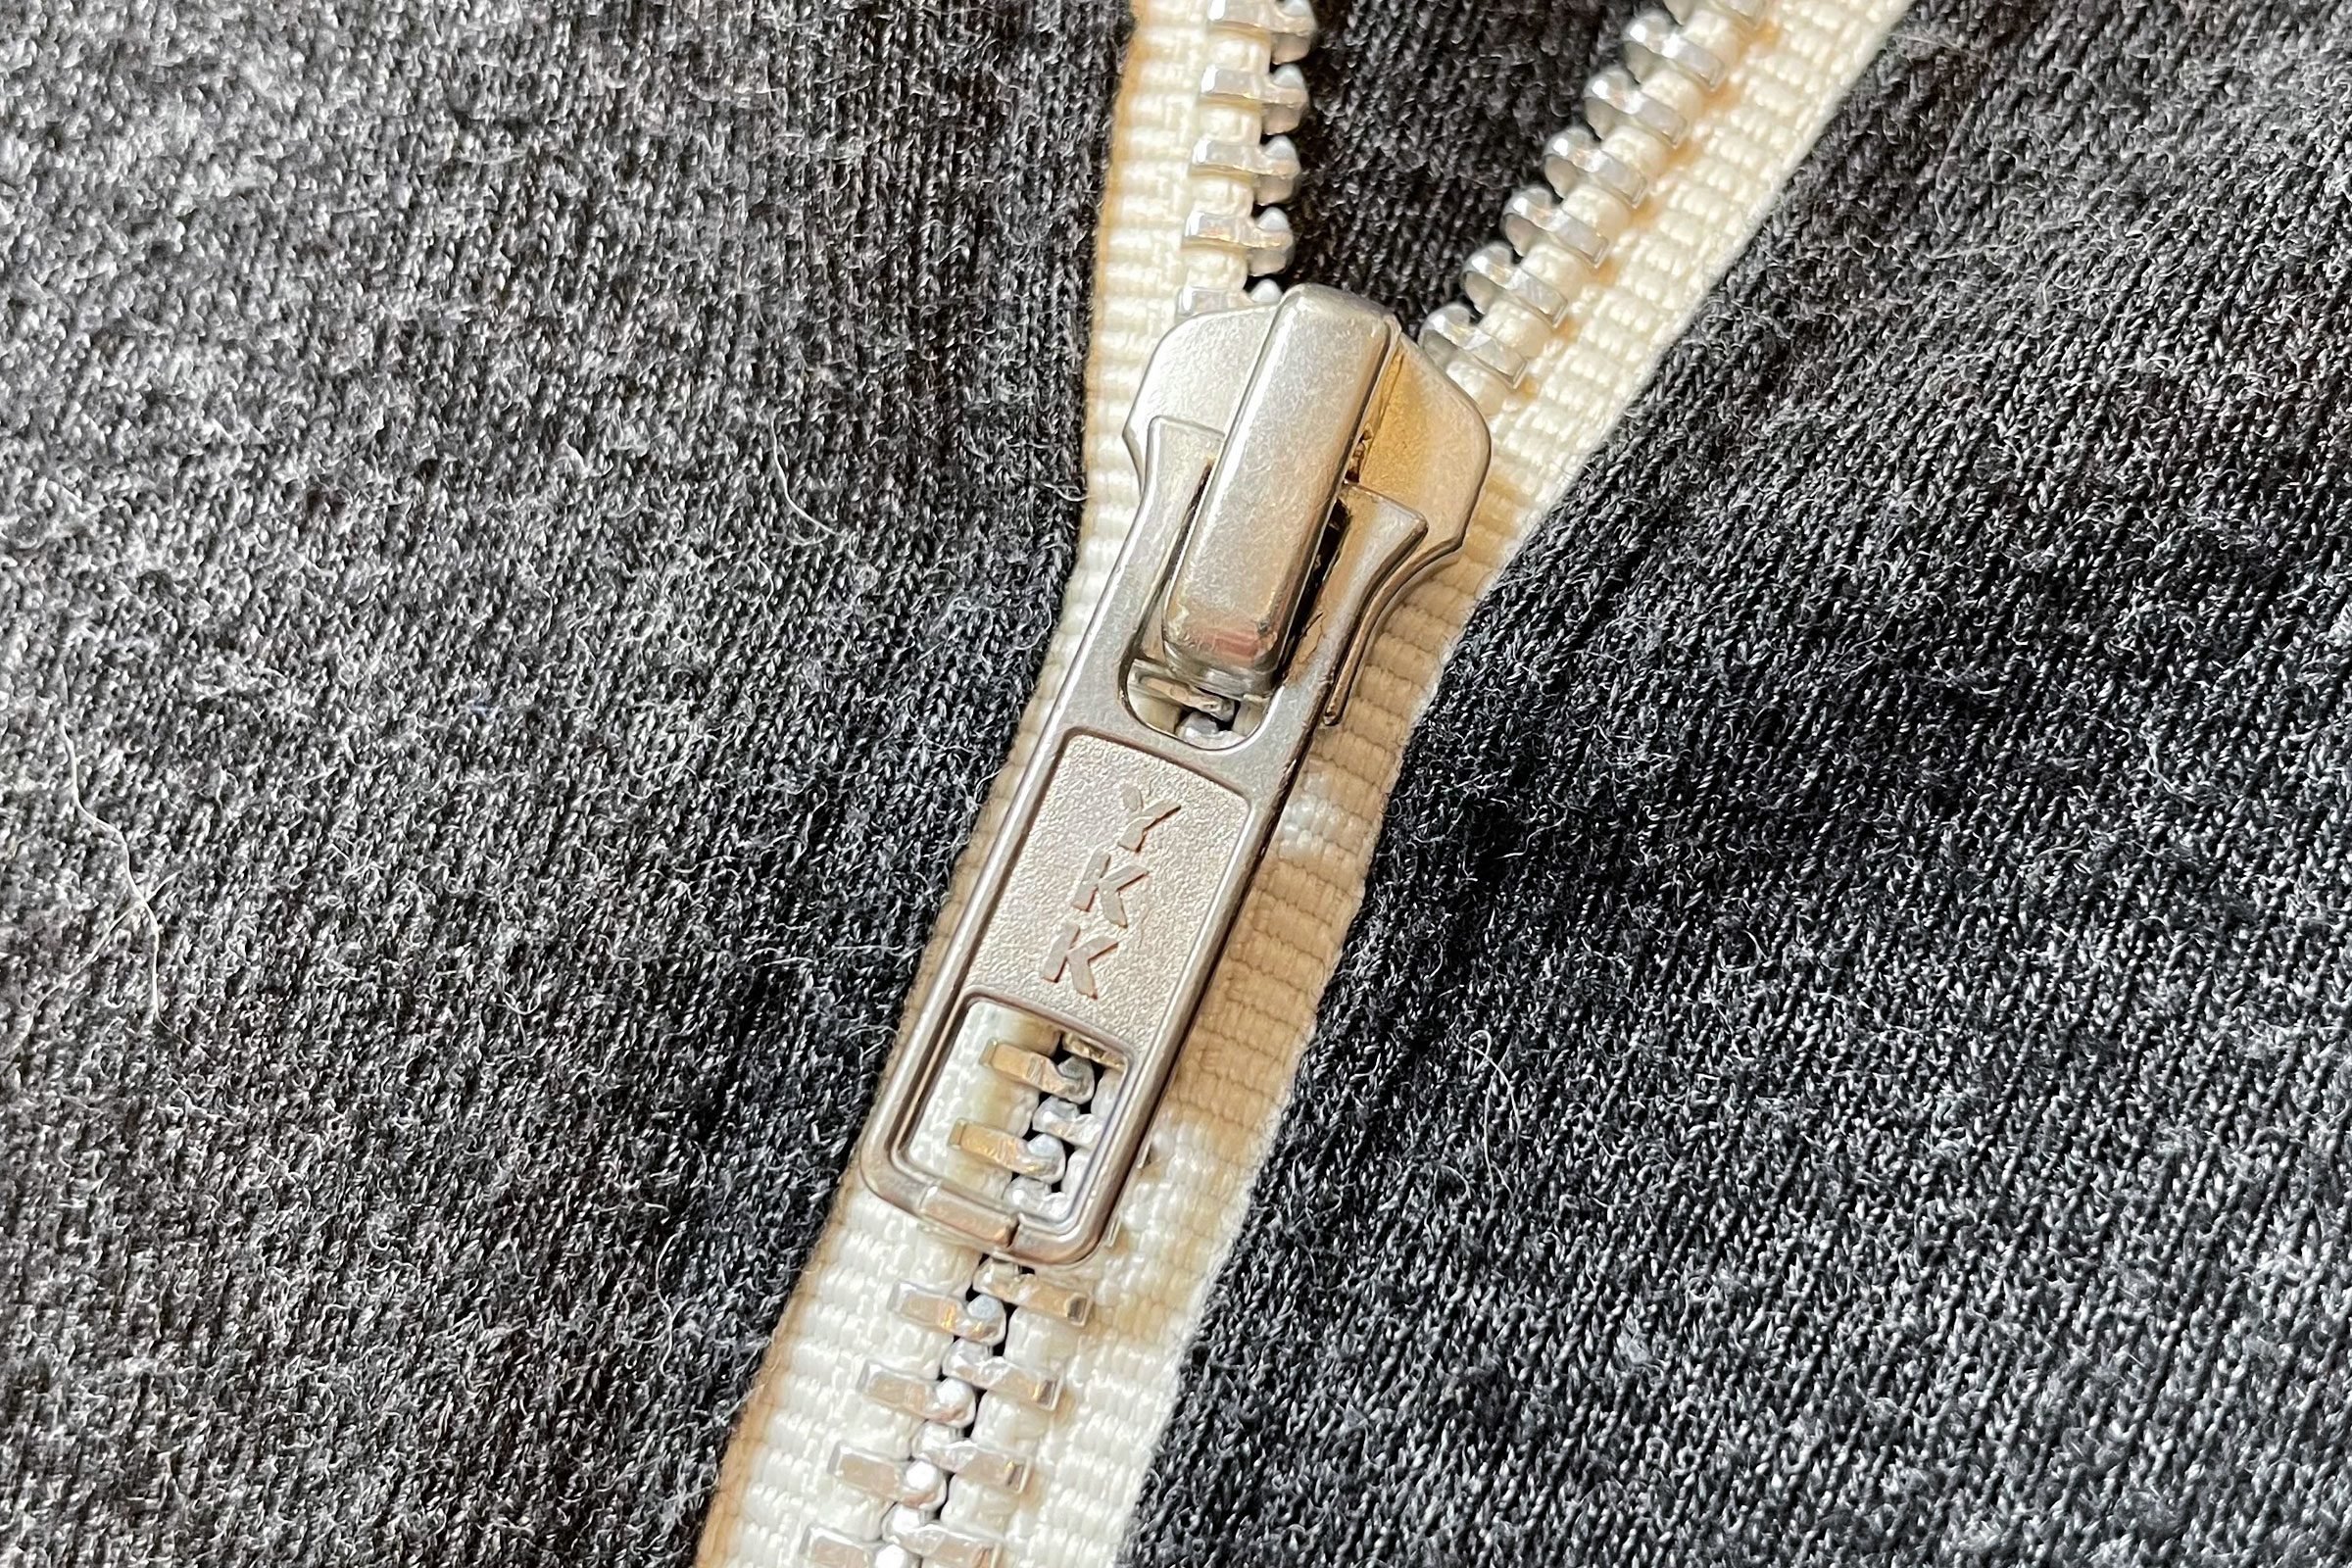 Every pair of Lucky Brand jeans has a tab bearing the slogan